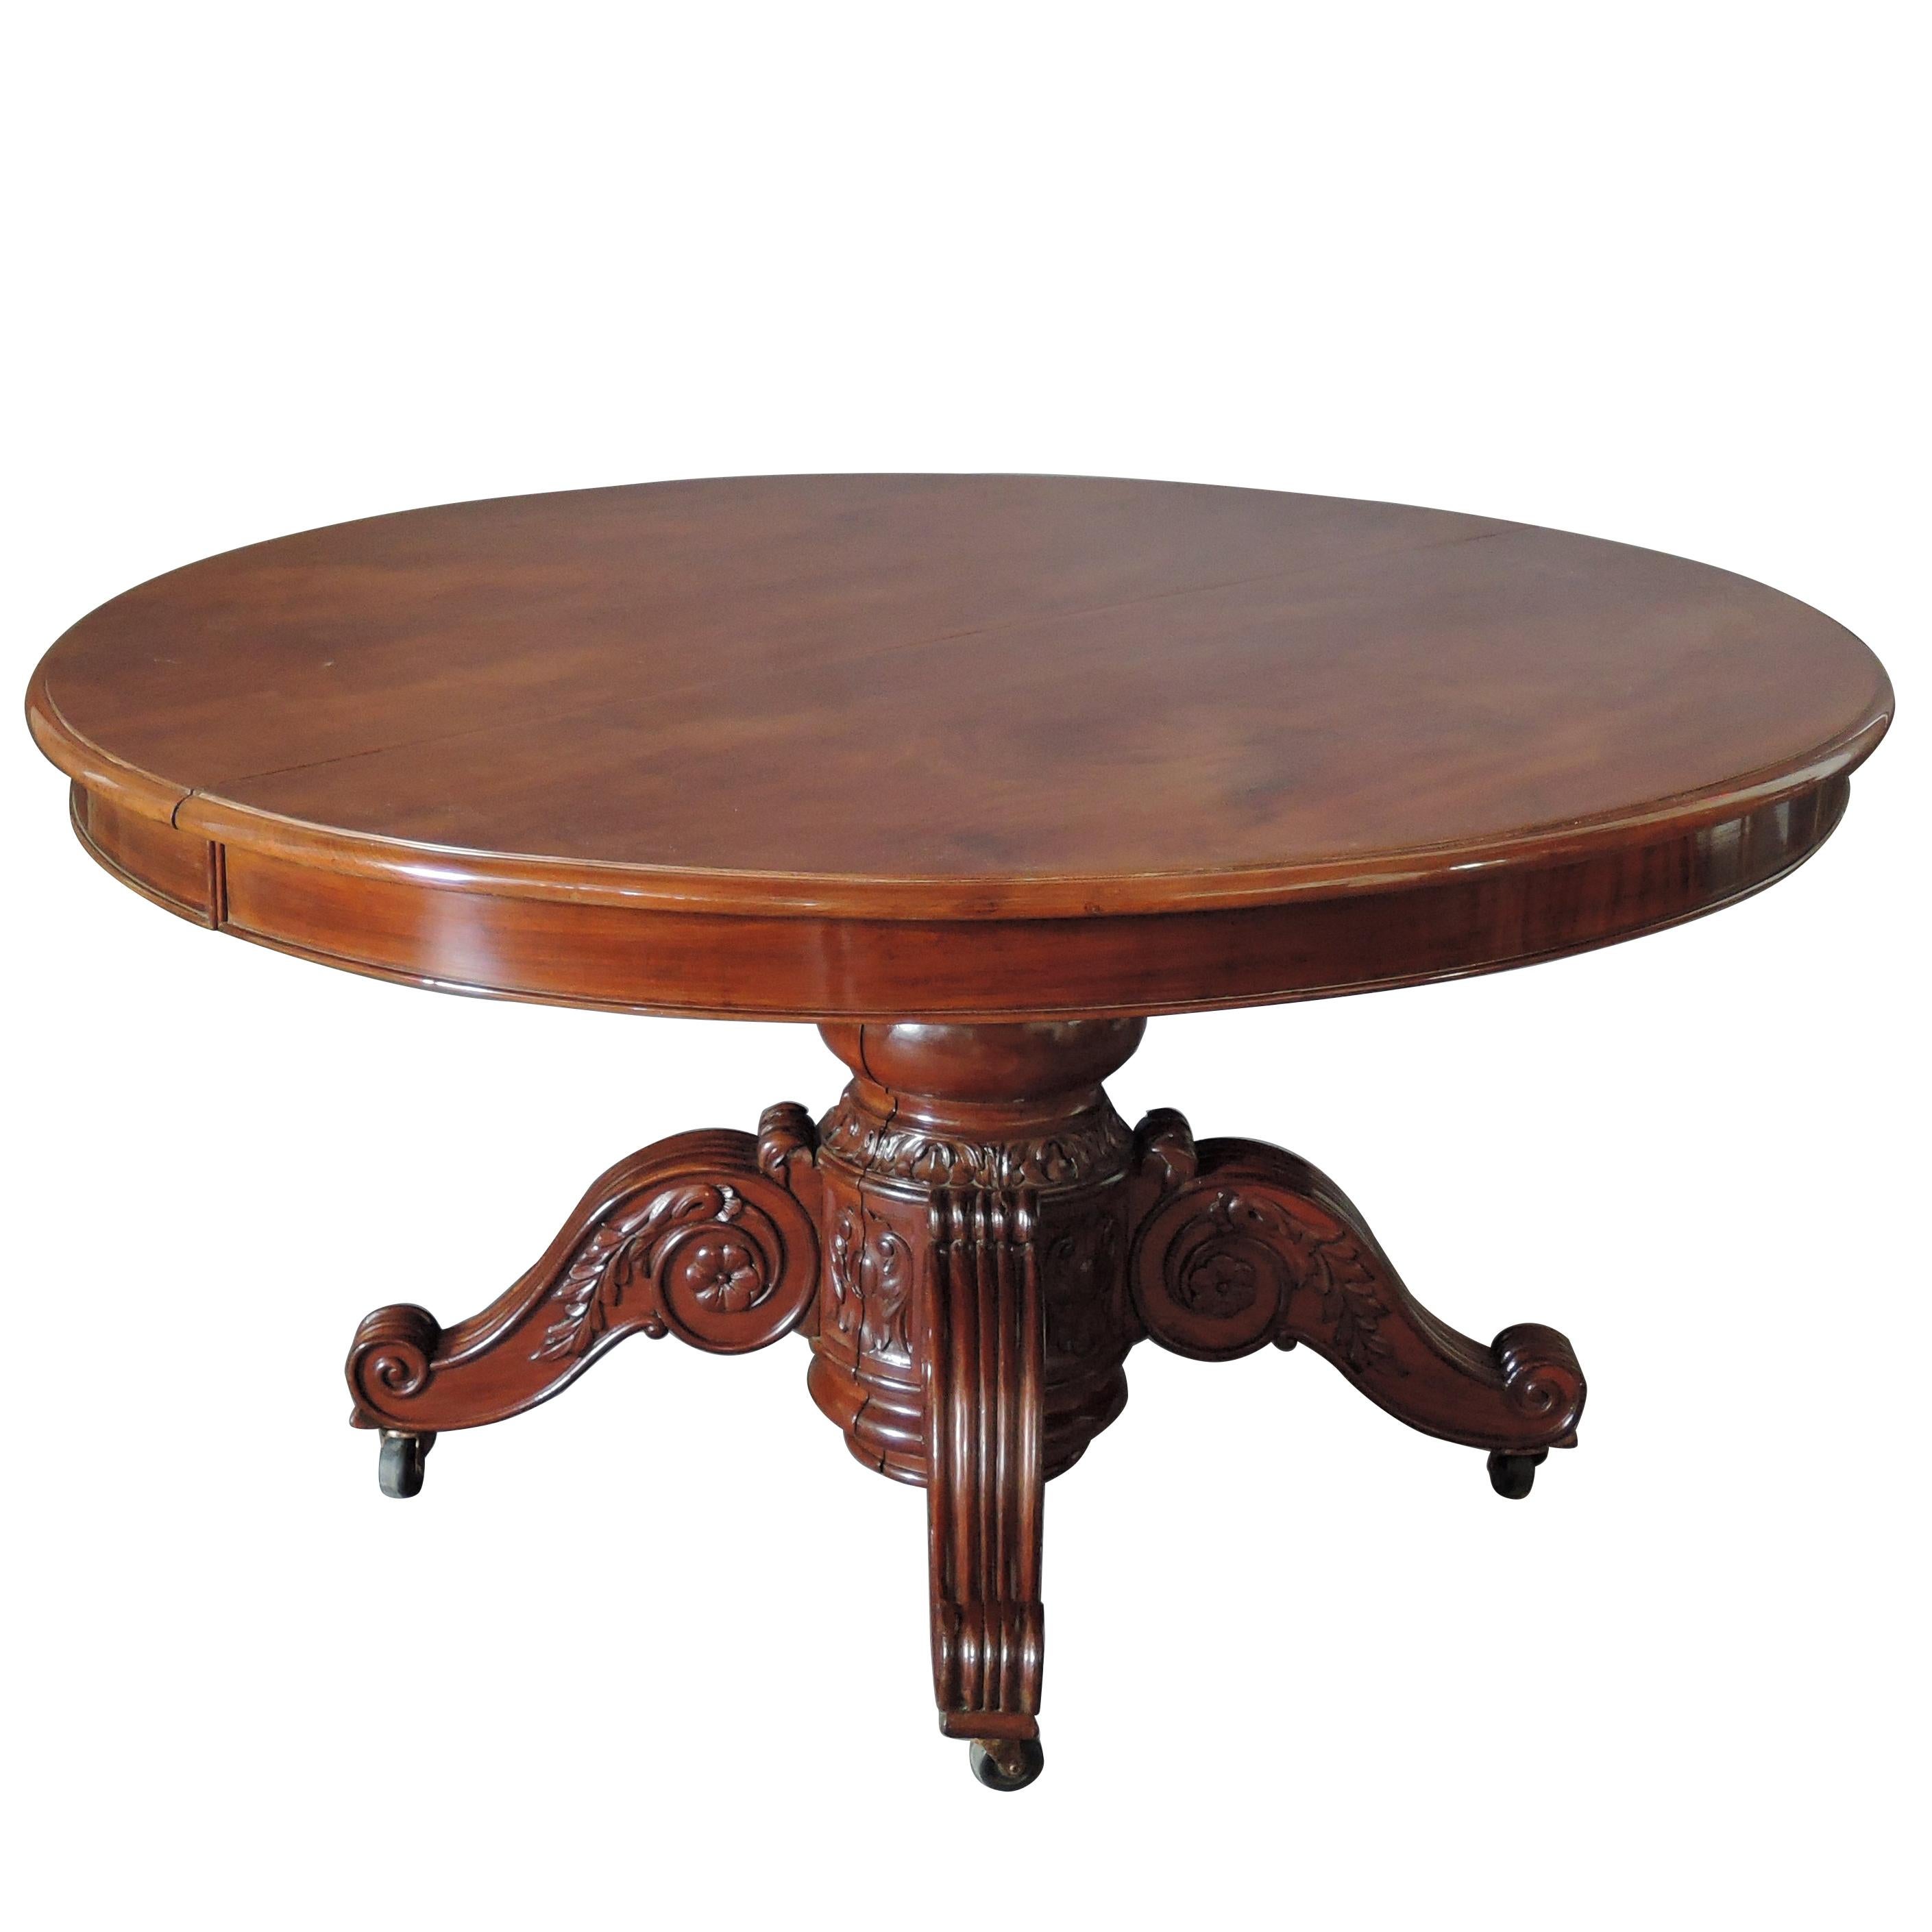 A Fine Large French 19th Century Solid Mahogany Oval Table For Sale